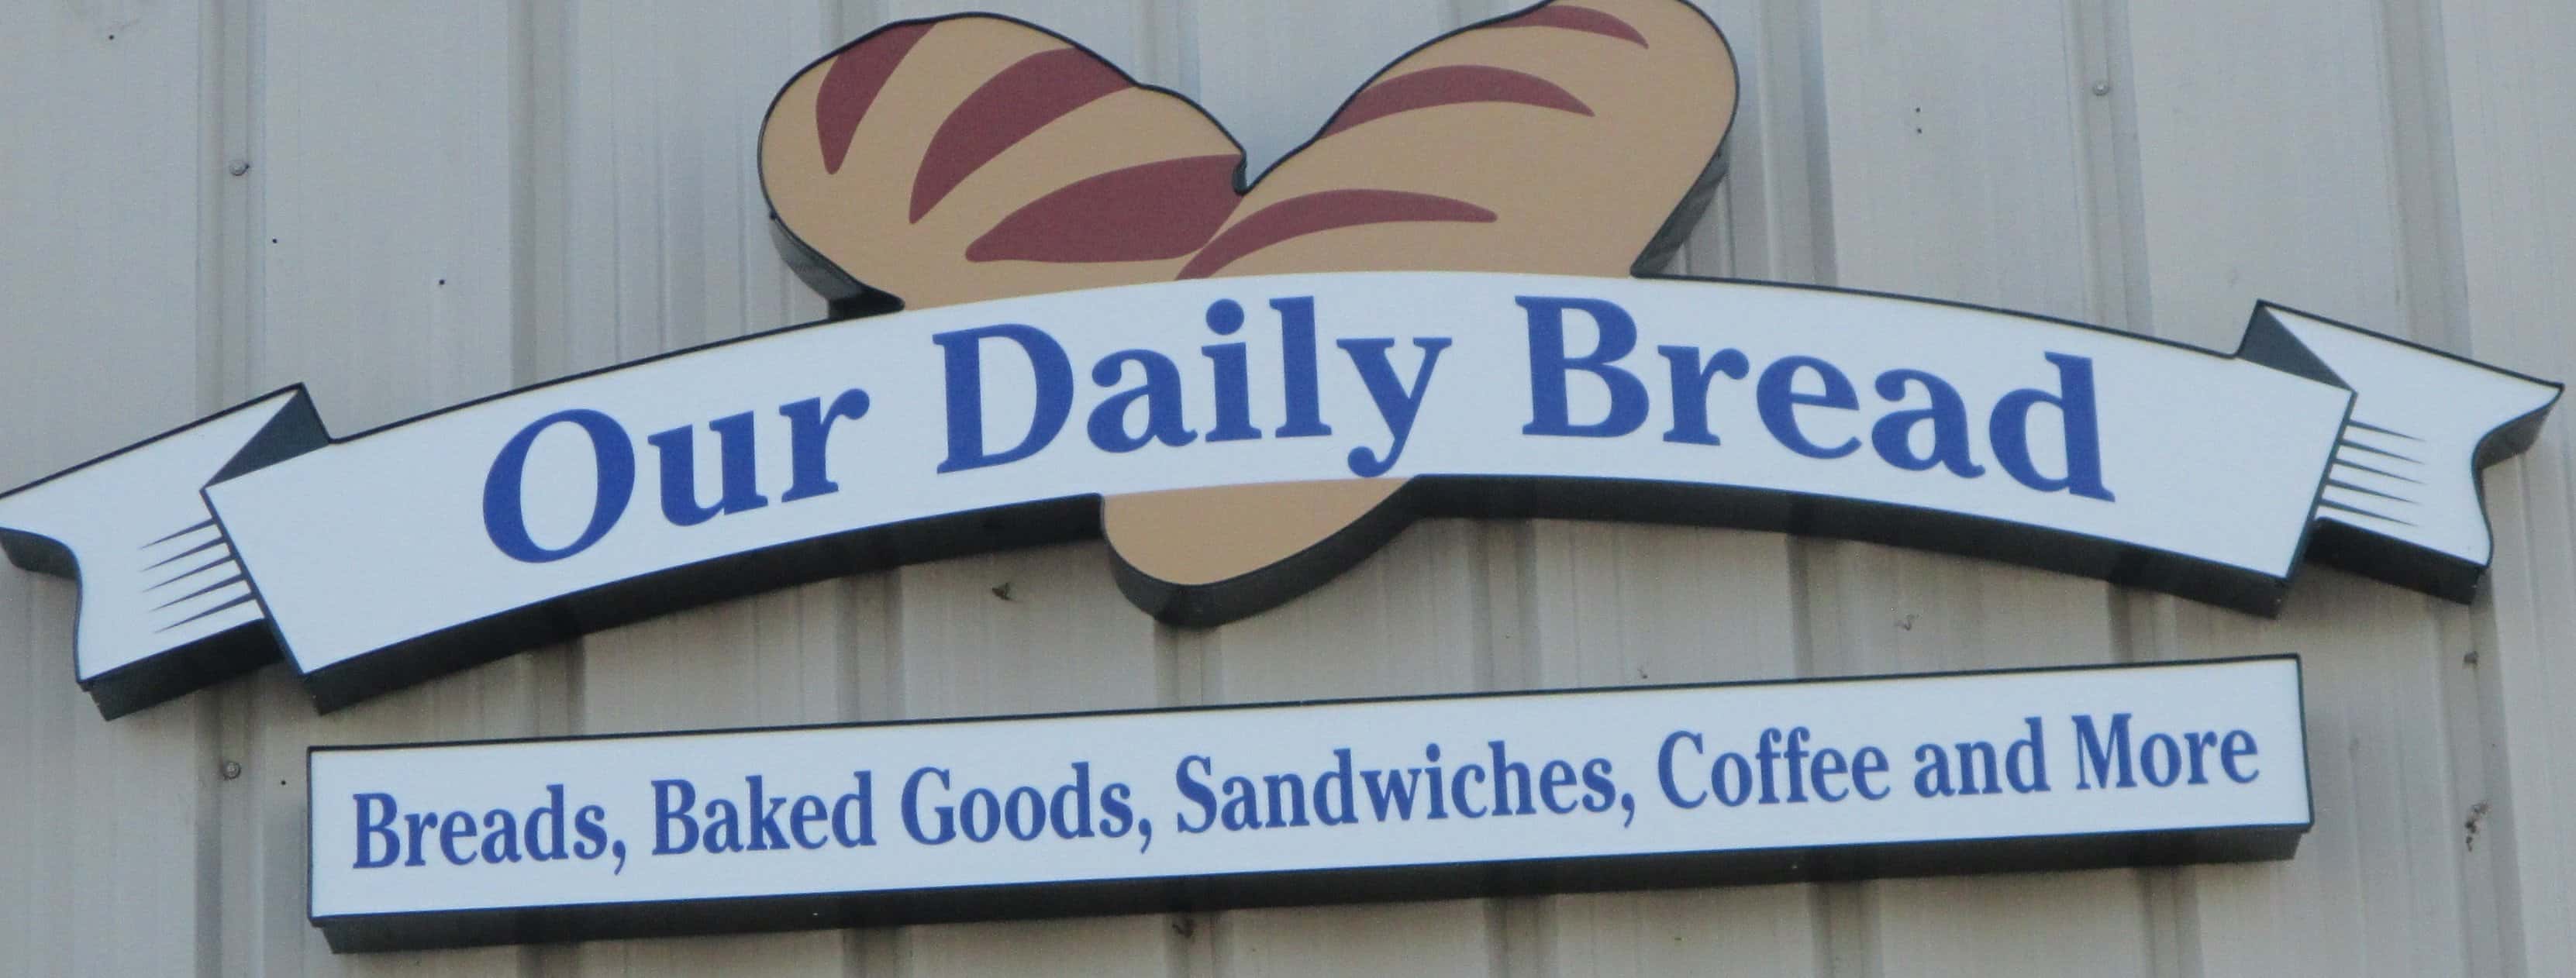 Our Daily Bread Encourages Customers to Help Others WKDZ Radio